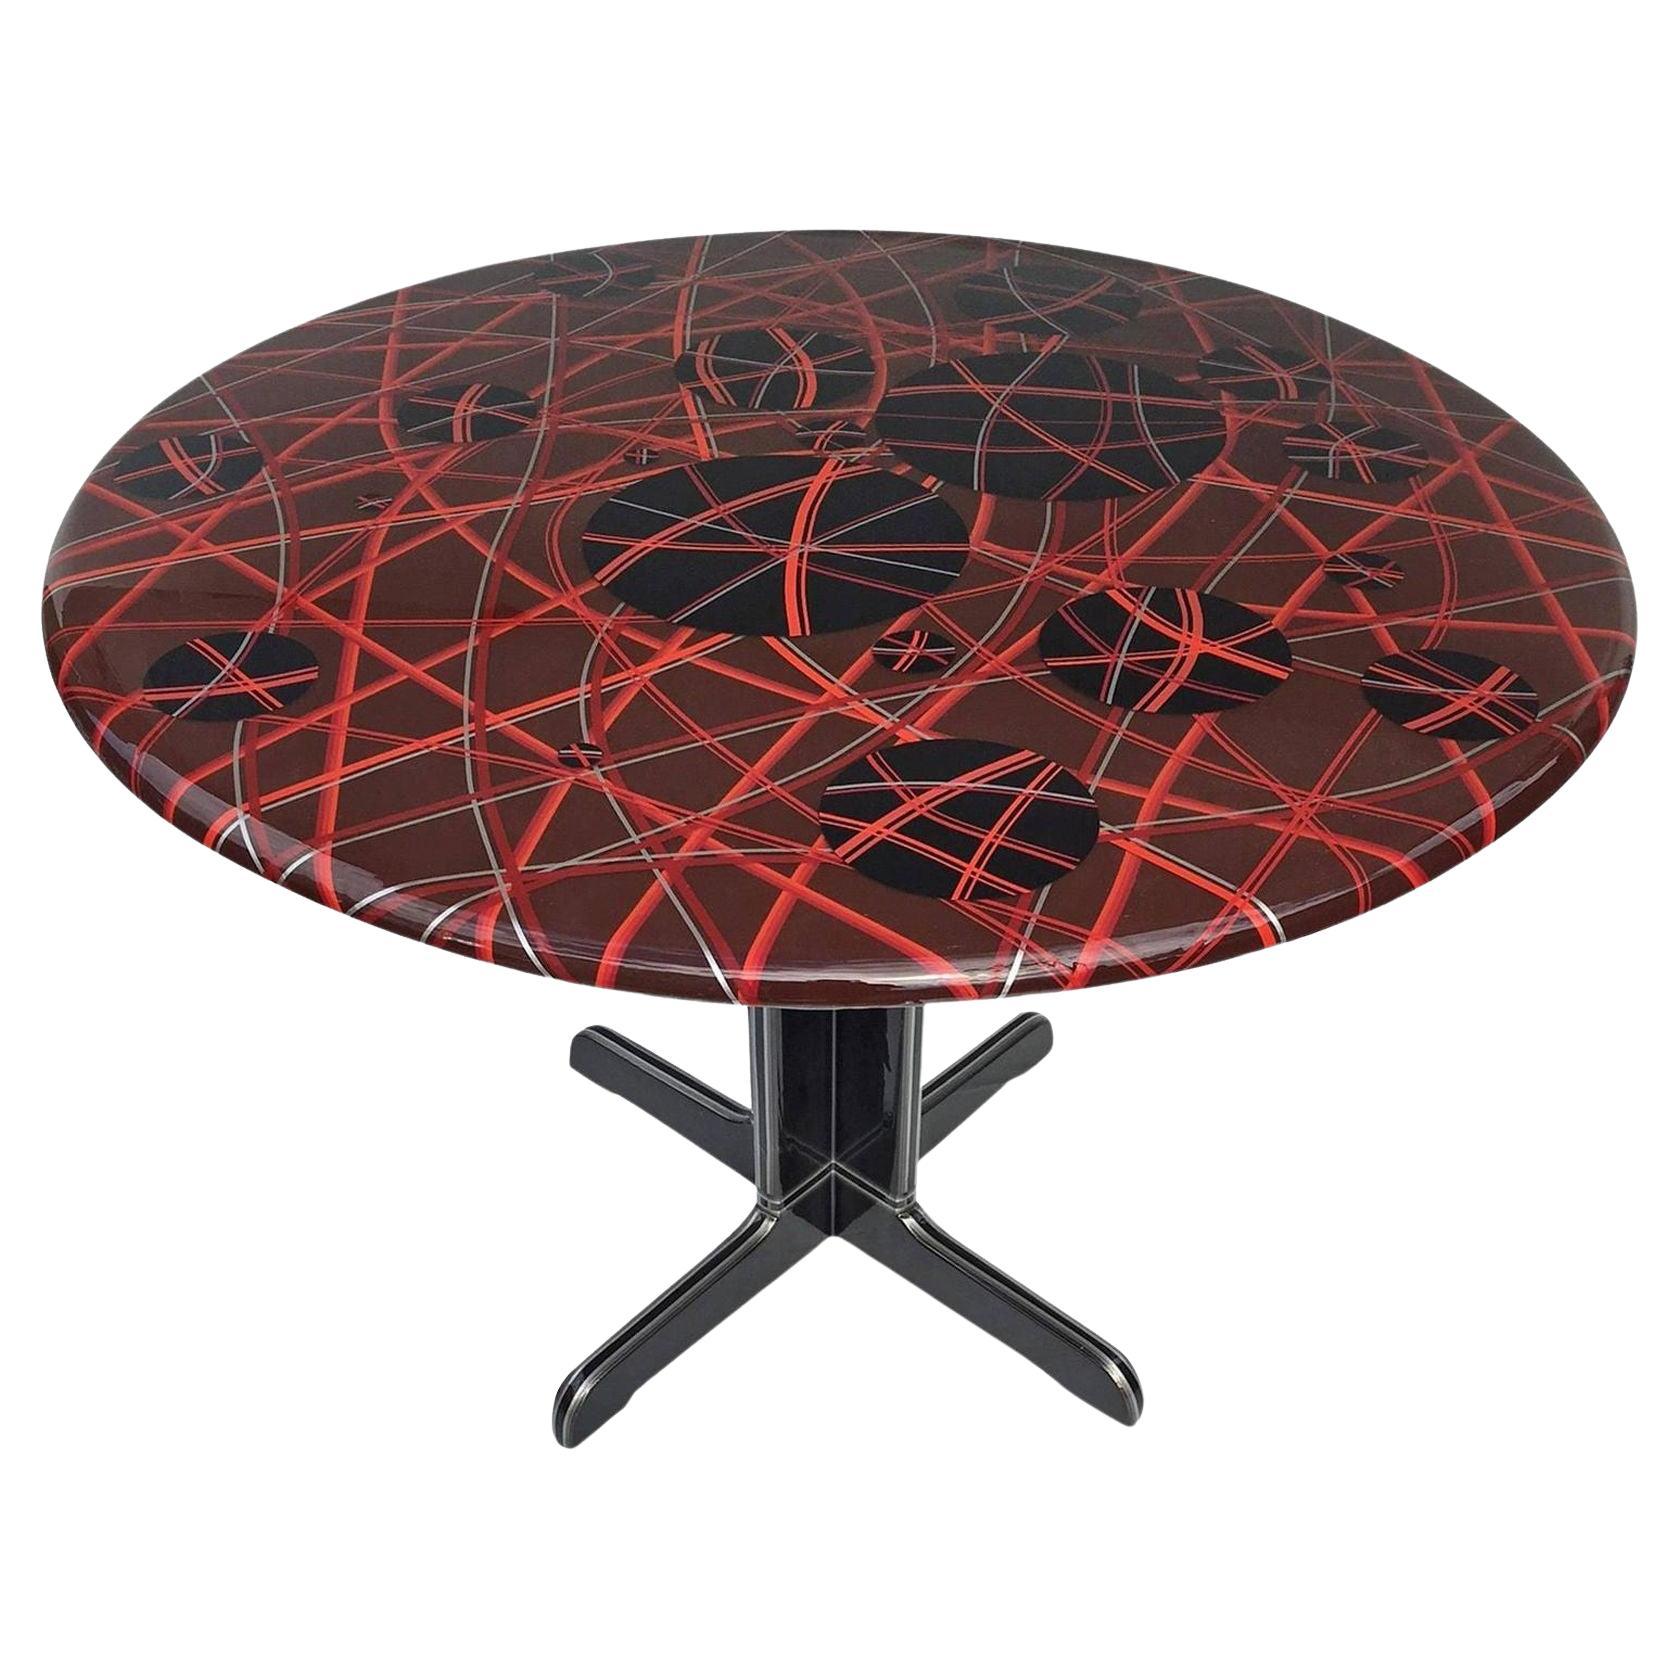 Customized Vintage 1970s Table by Mauro Oliveira For Sale at 1stDibs